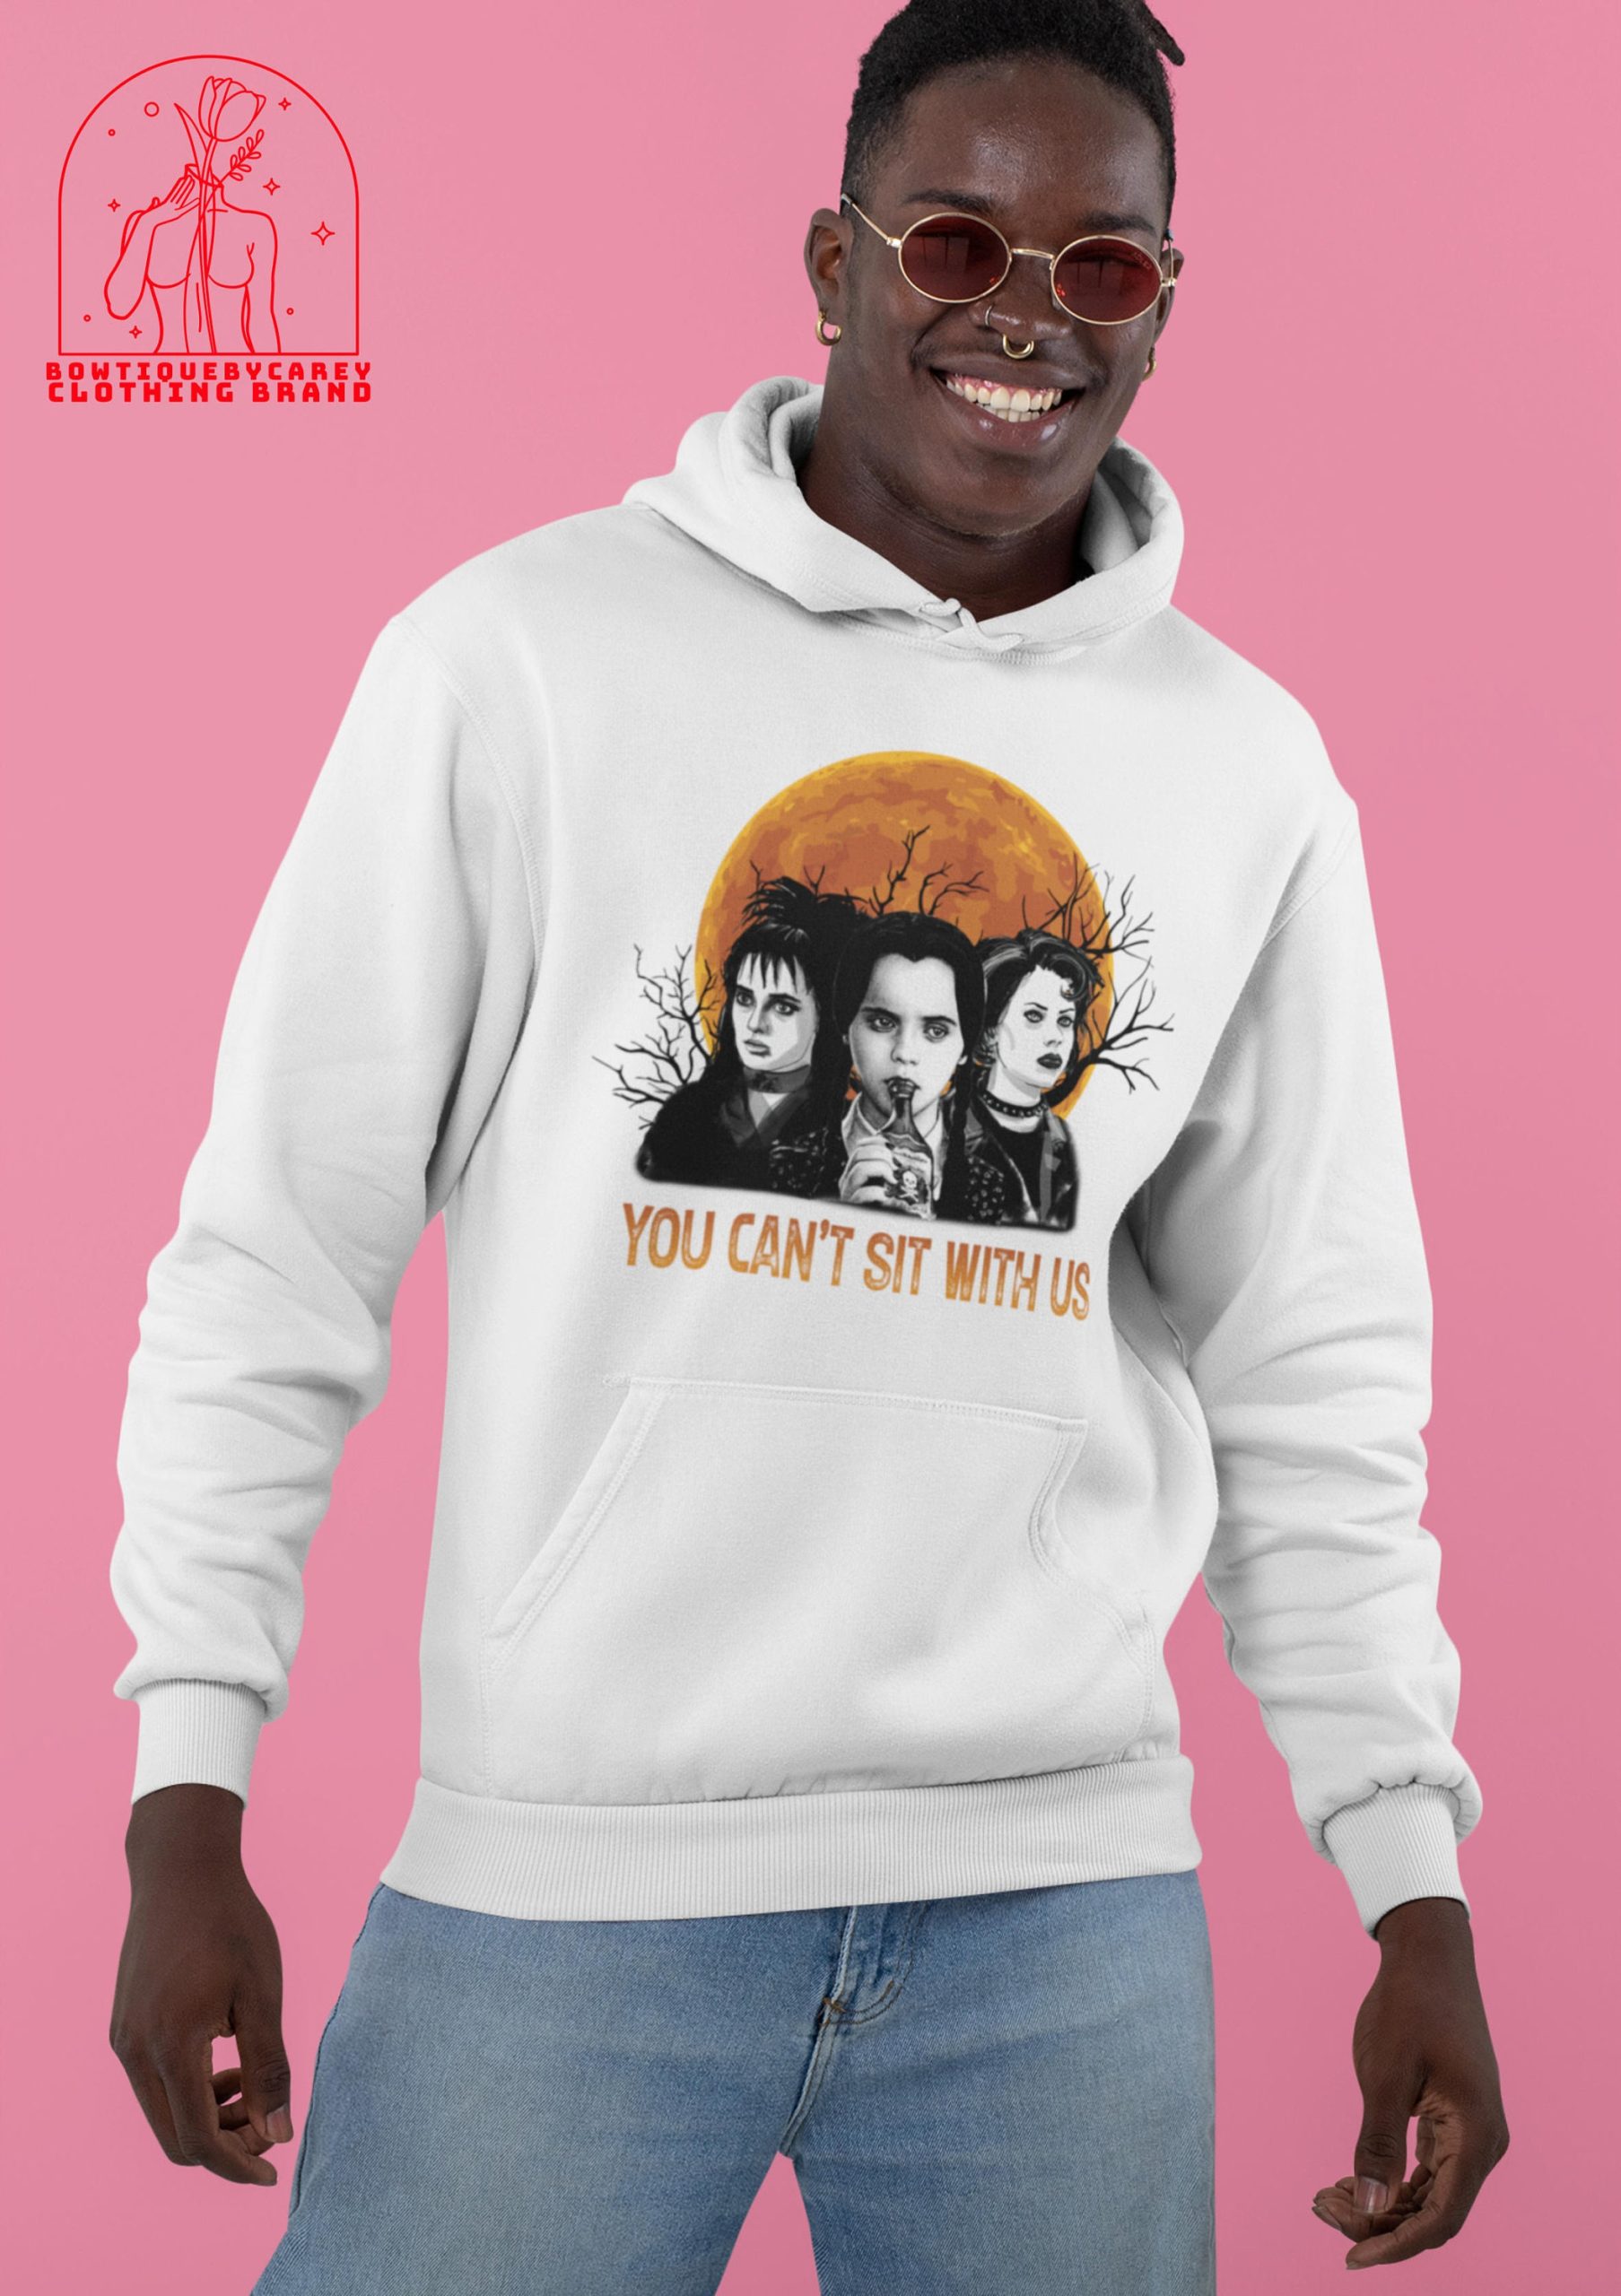 You Can't Sit With Us Wednesday Addams And Friends The Addams Family Unisex T-Shirt